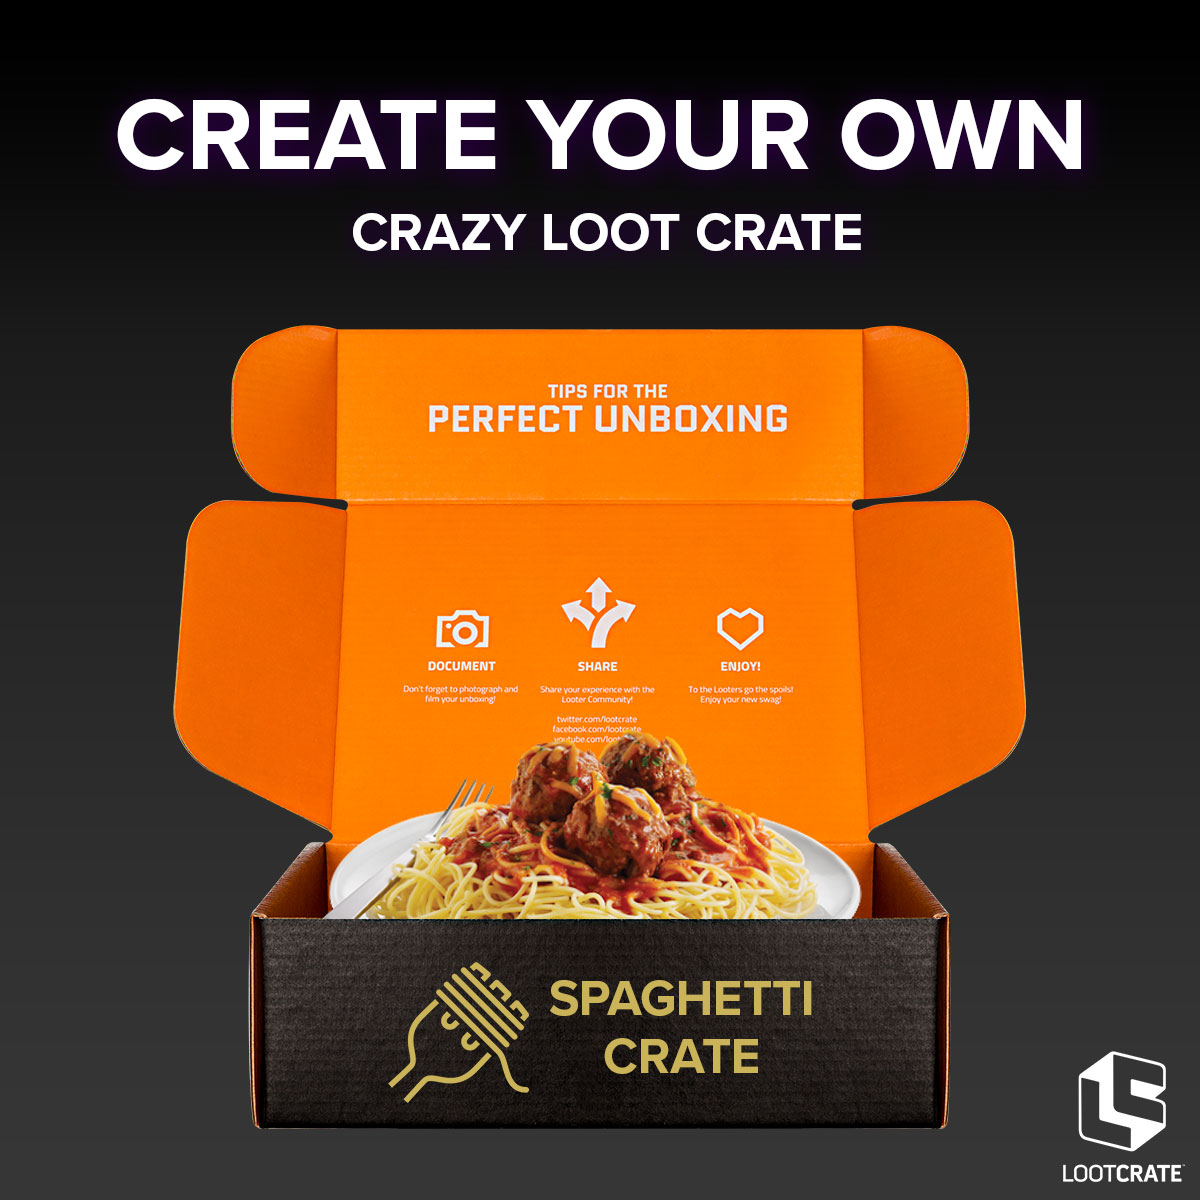 Create Your Own CRAZY Loot Crate!